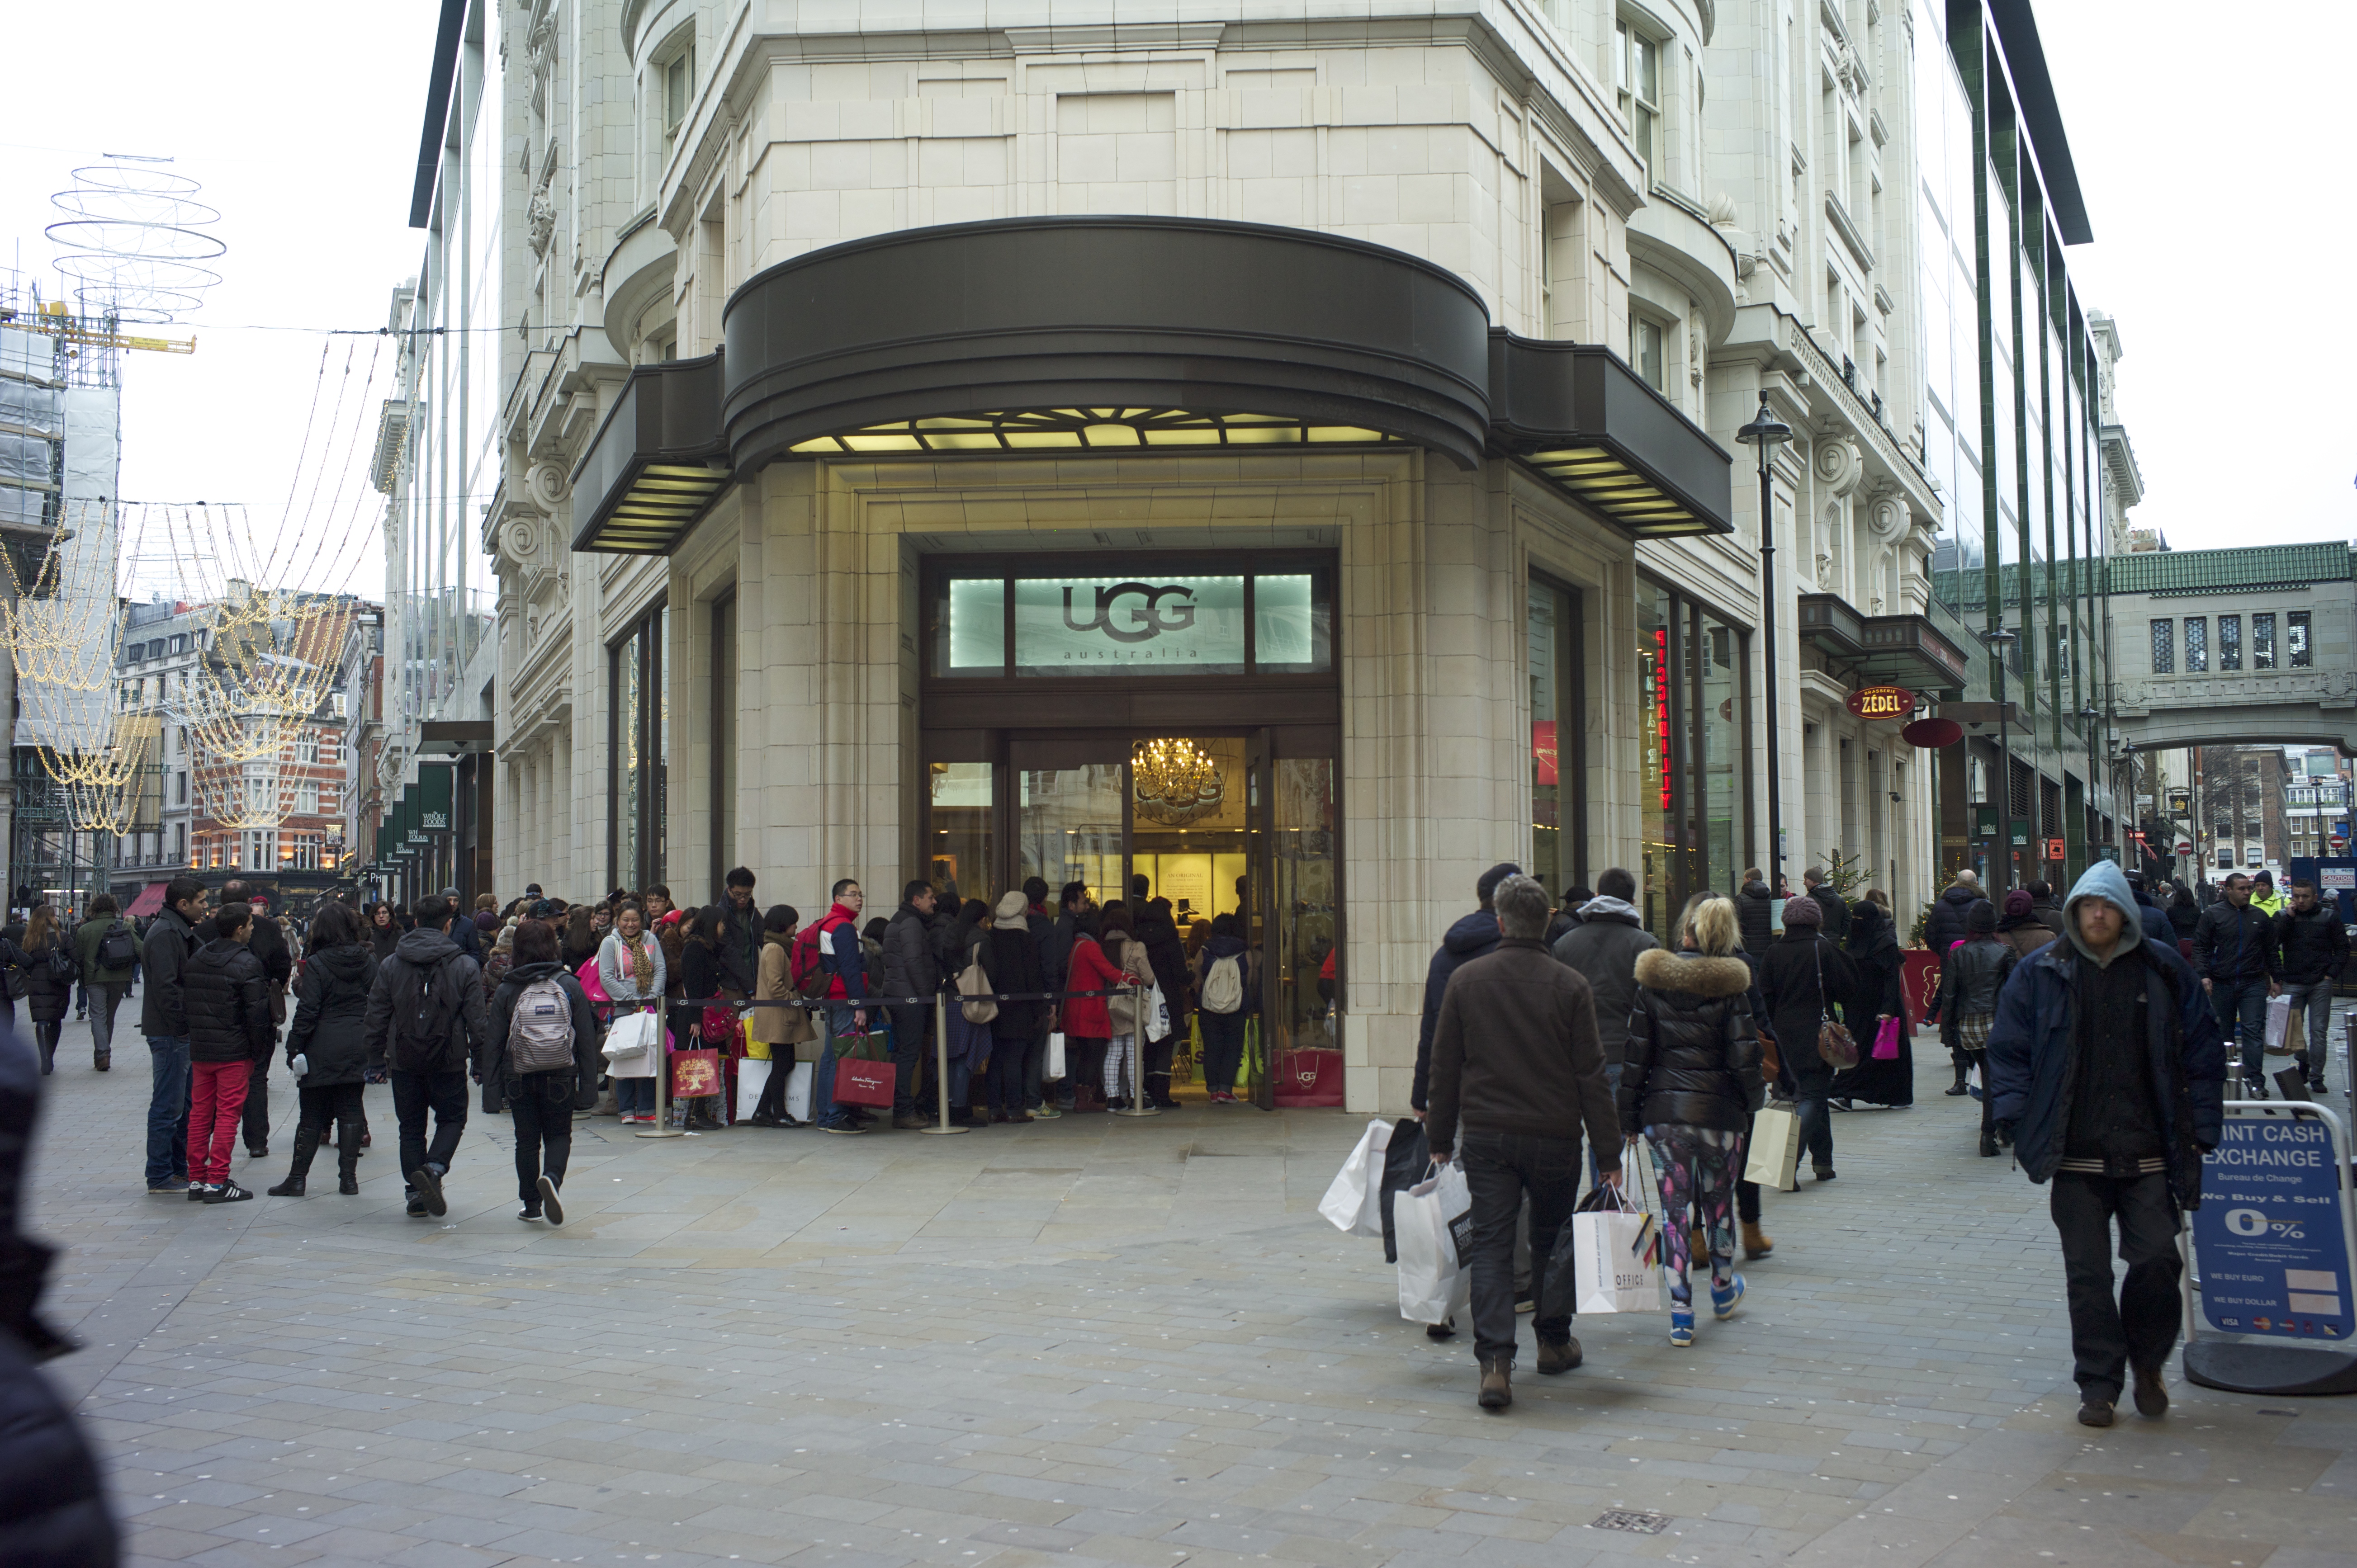 ugg piccadilly london